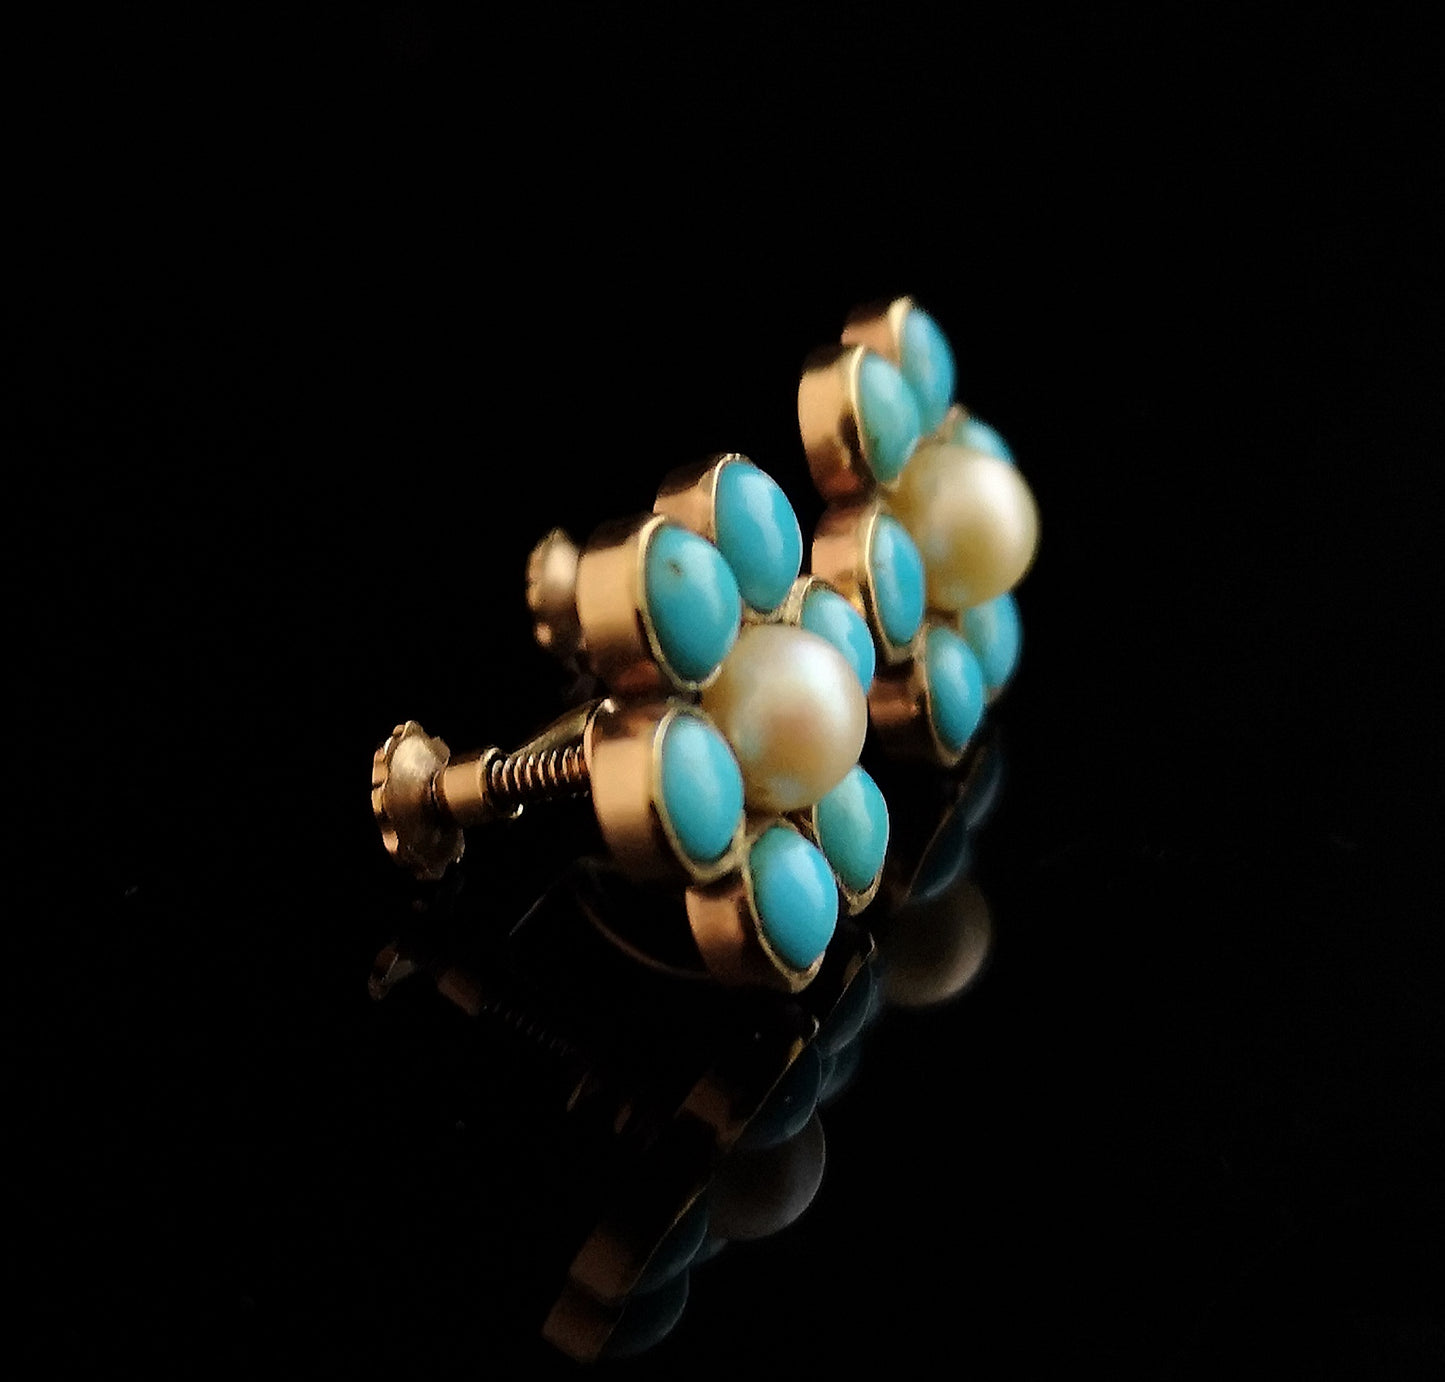 Antique flower earrings, turquoise and pearl, 9ct gold